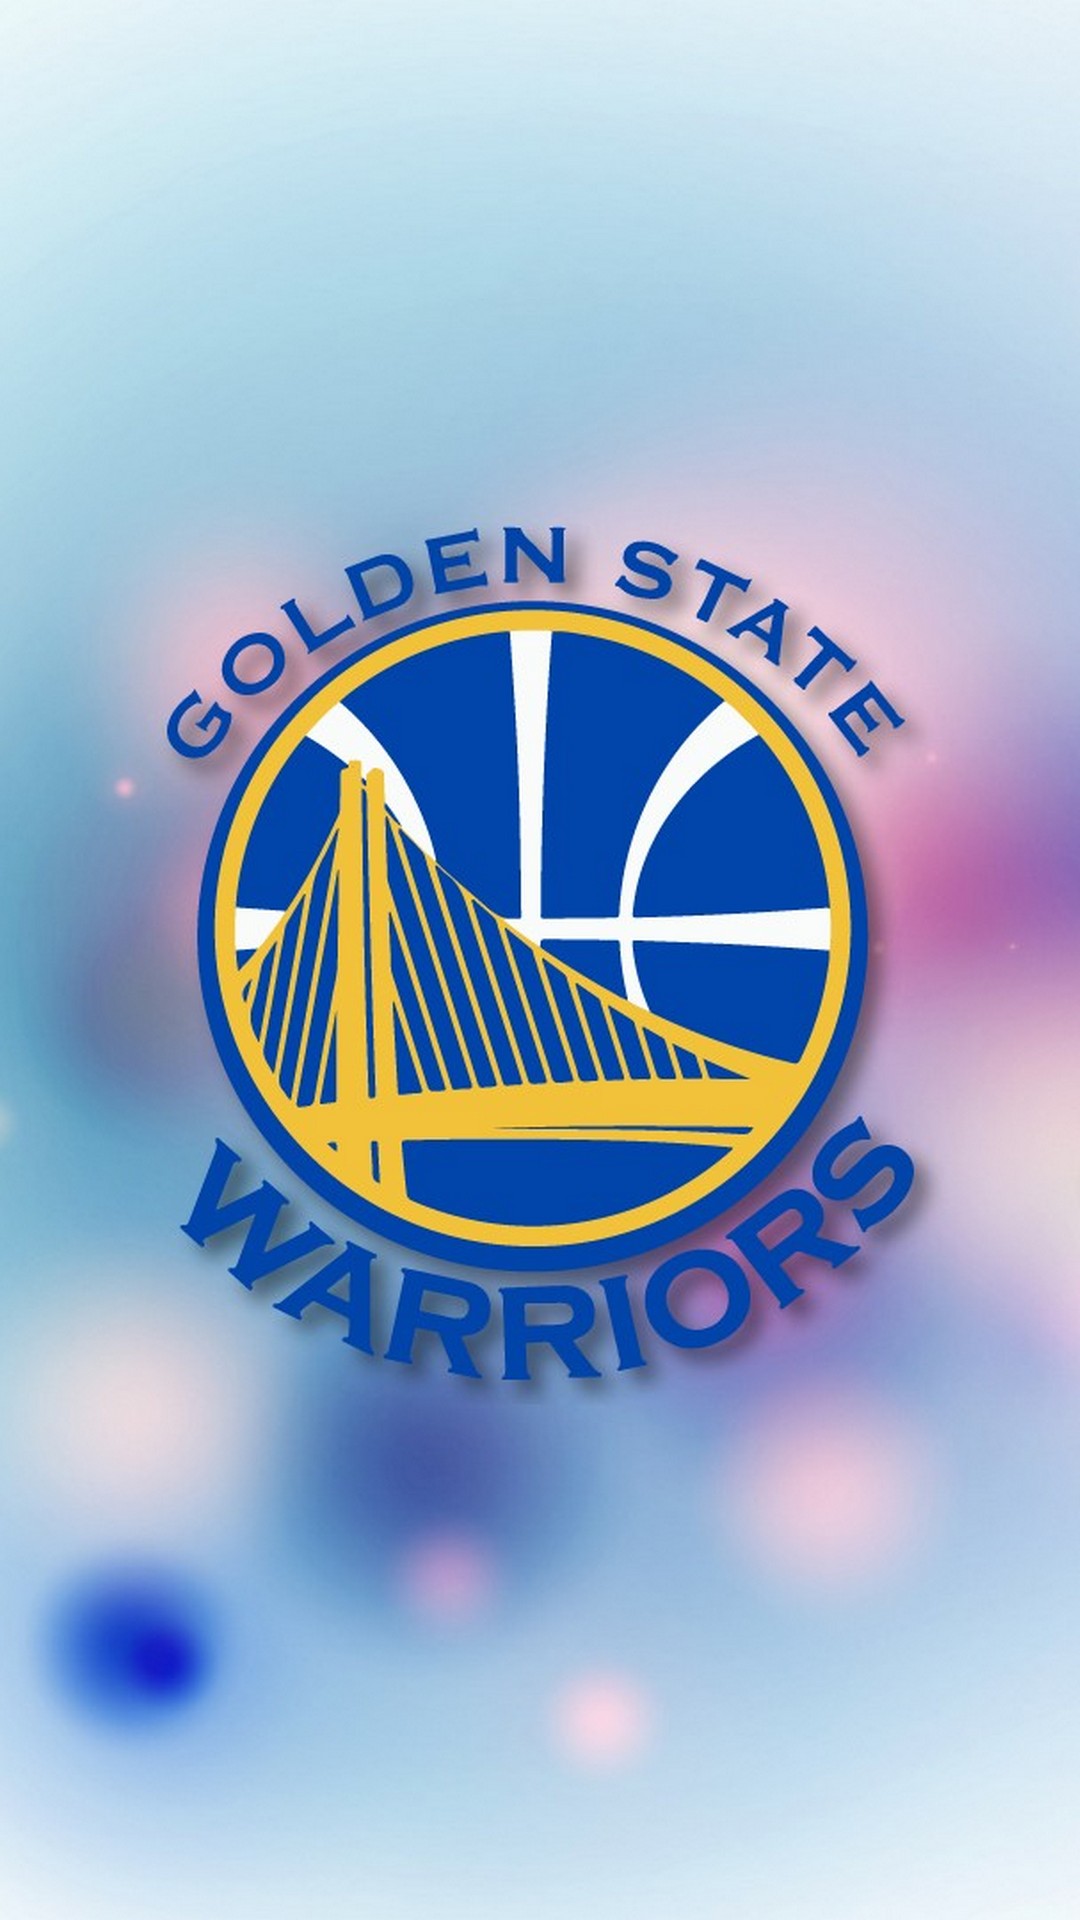 Golden State Warriors Android Wallpaper with image resolution 1080x1920 pixel. You can make this wallpaper for your Android backgrounds, Tablet, Smartphones Screensavers and Mobile Phone Lock Screen